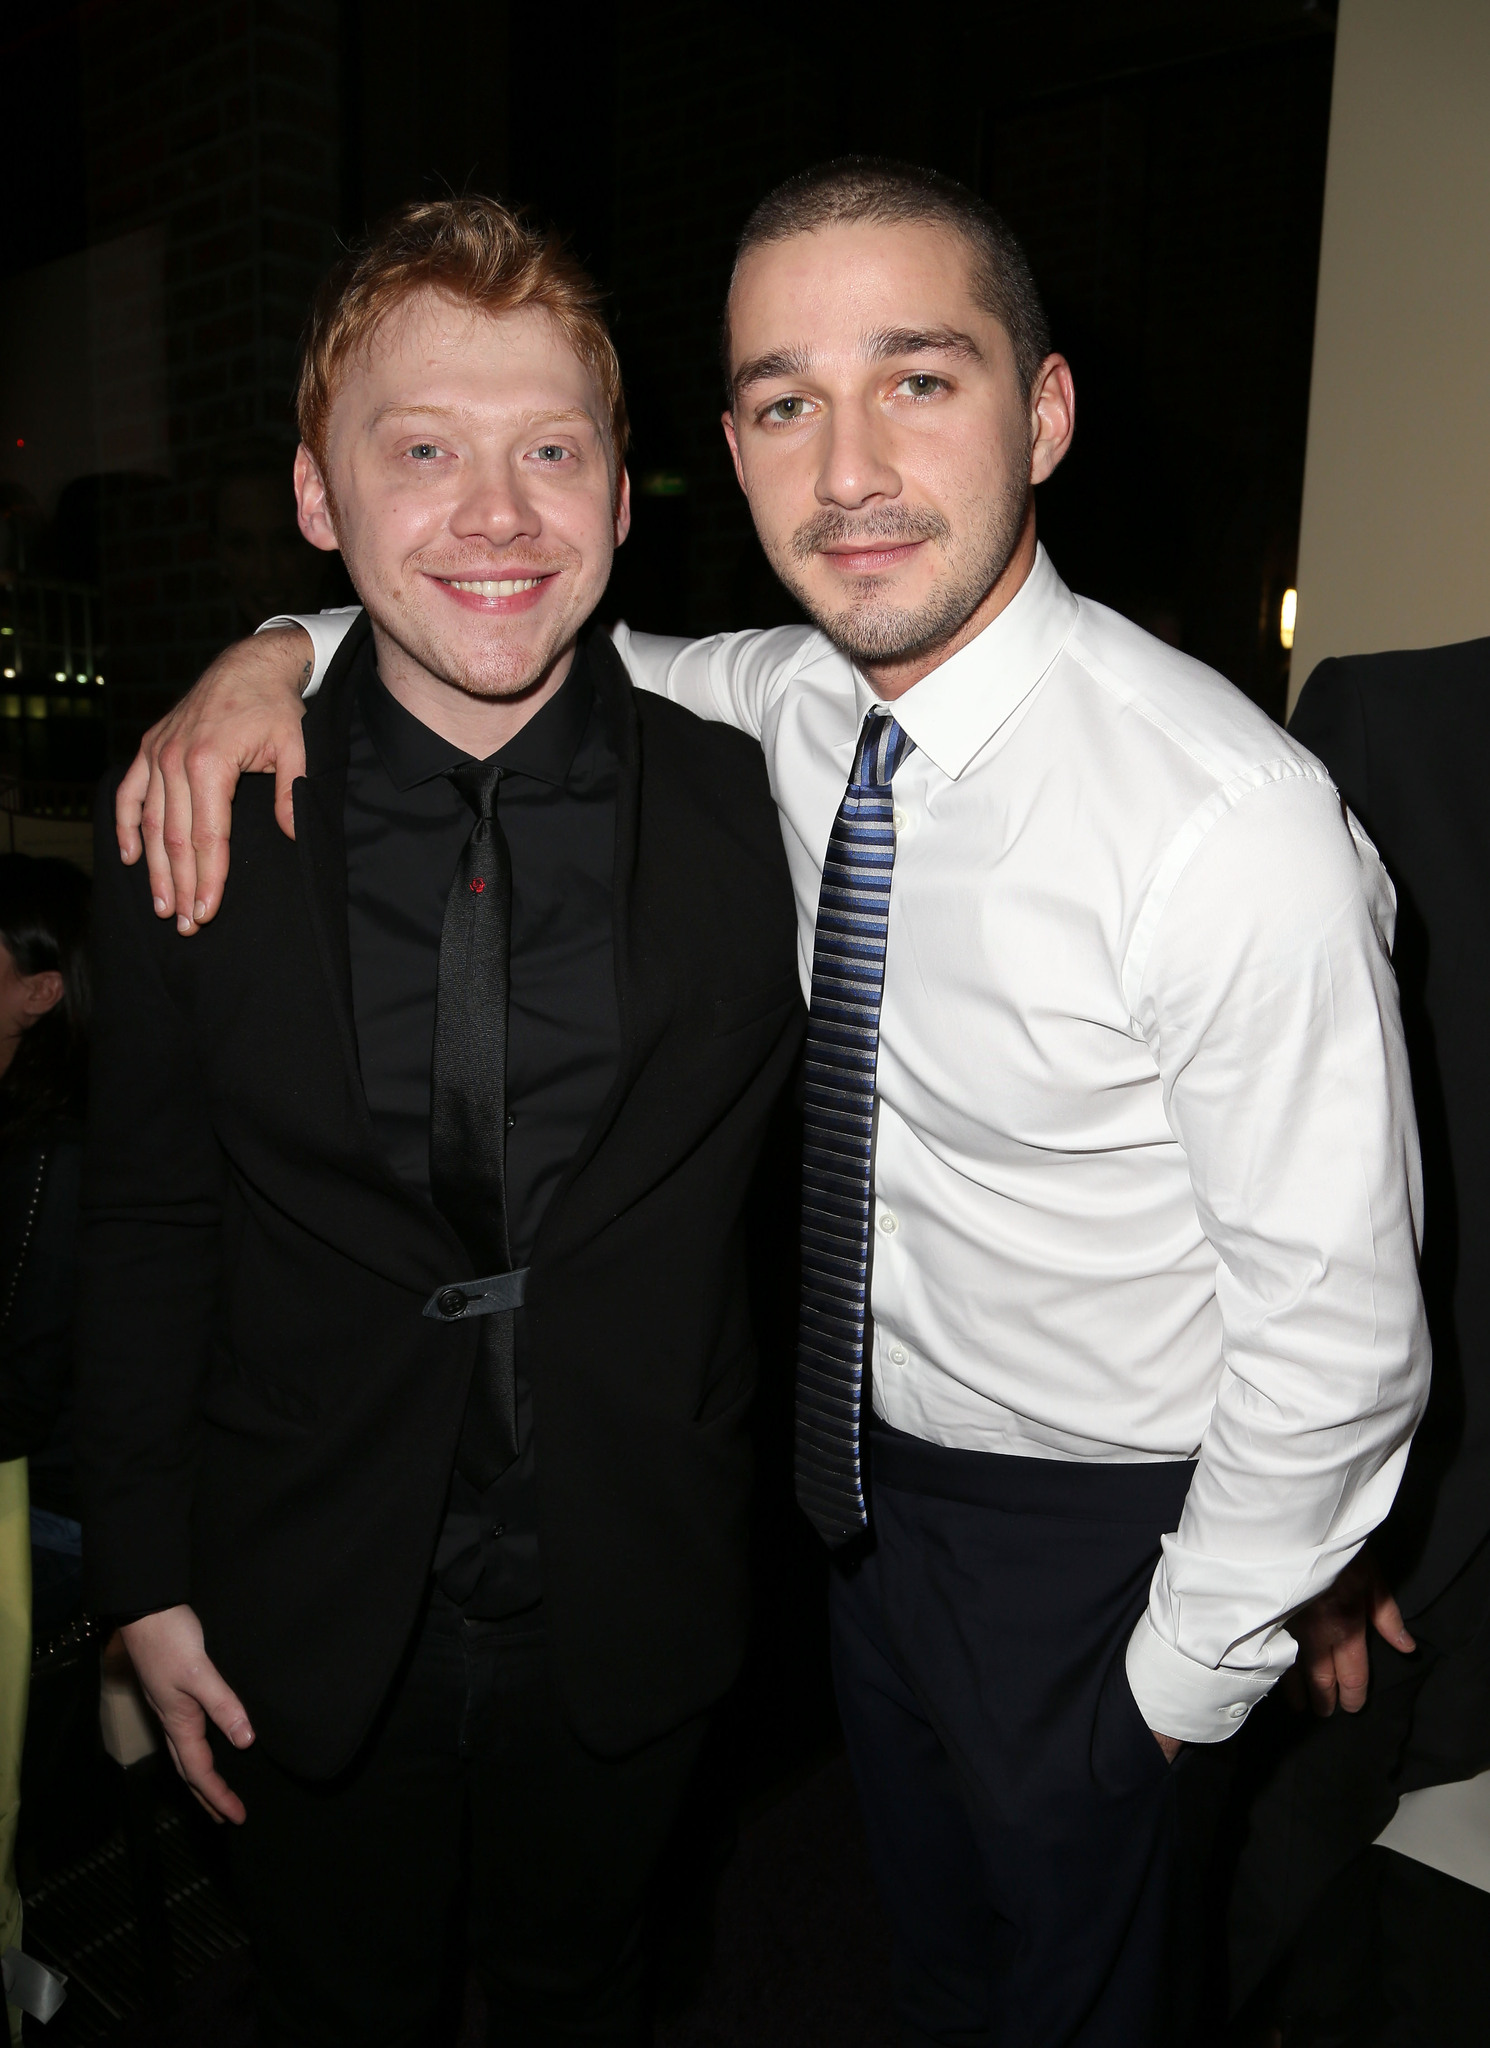 Rupert Grint and Shia LeBeouf attend 'The Necessary Death Of Charlie Countryman' Reception during the 63rd Berlinale International Film Festival.